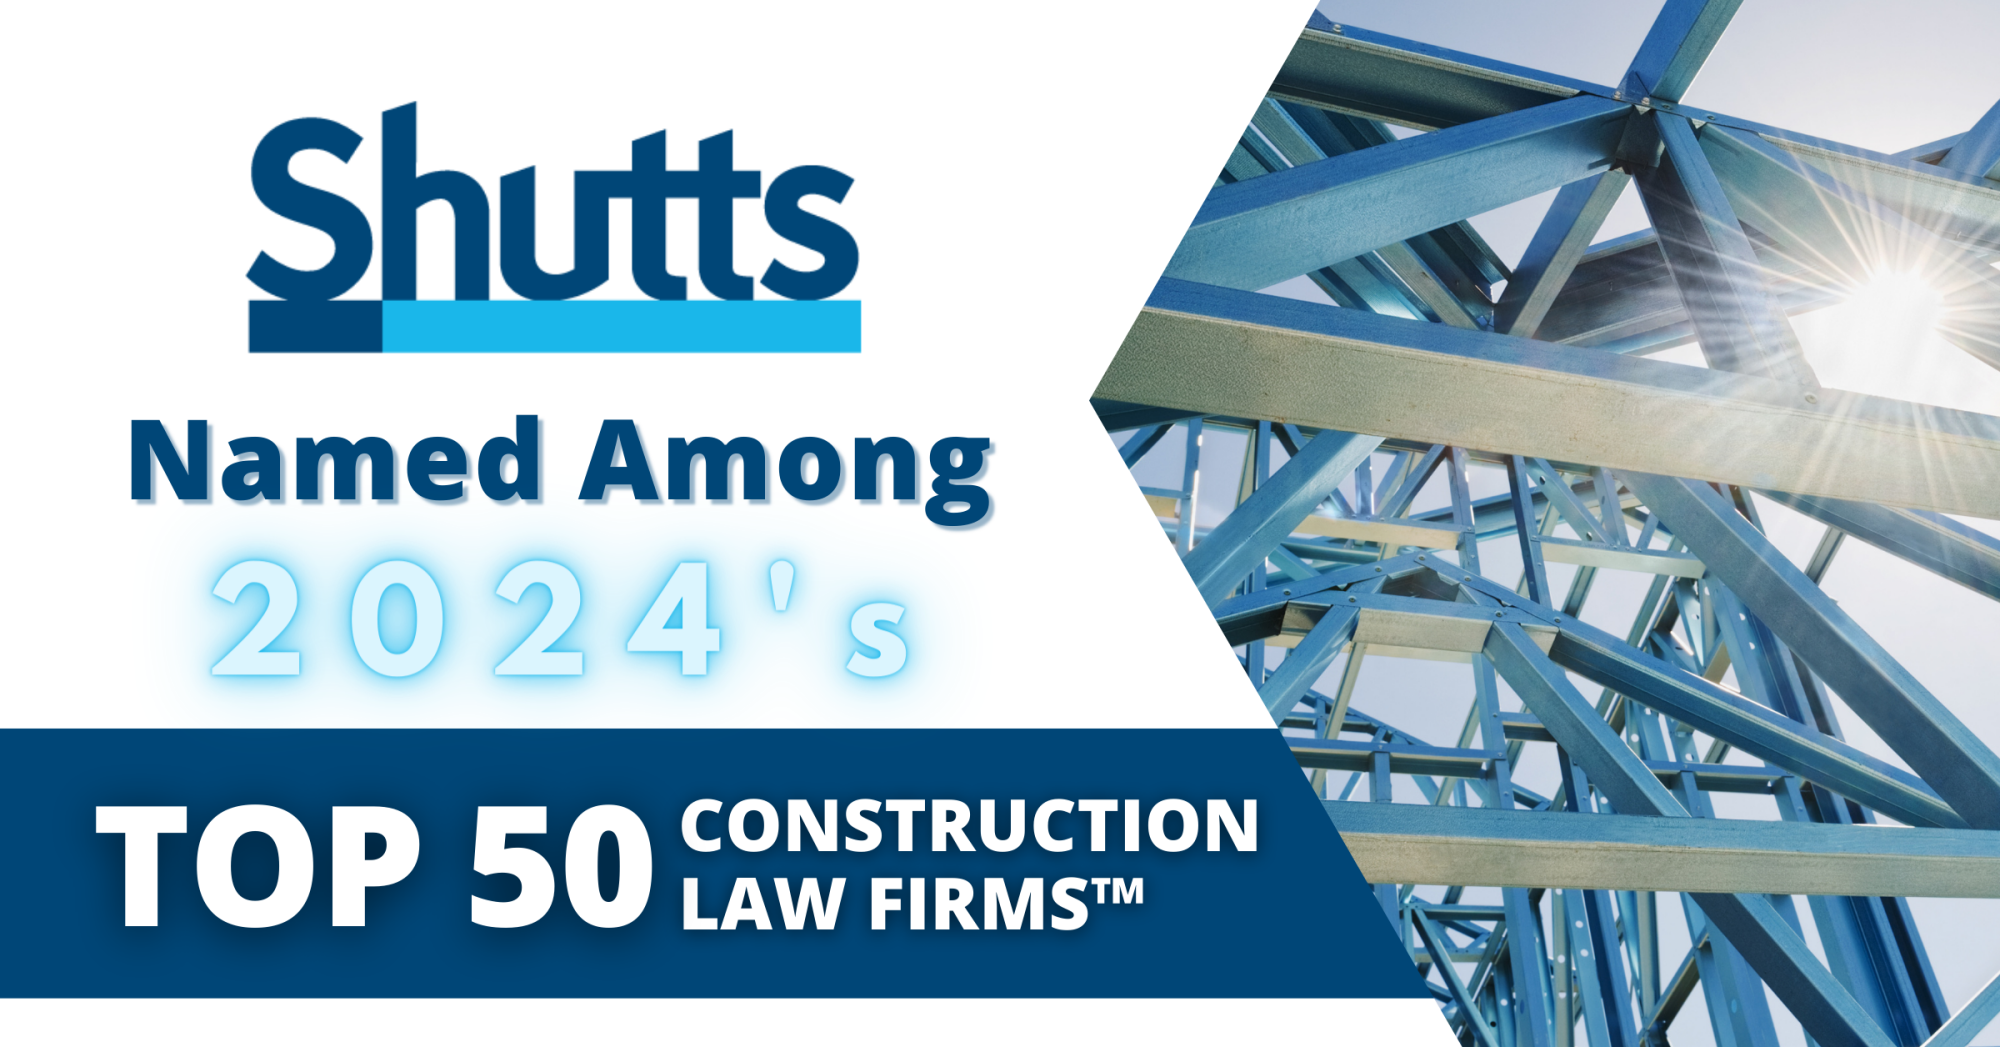 Shutts & Bowen Named Among 2024’s Top 50 Construction Law Firms